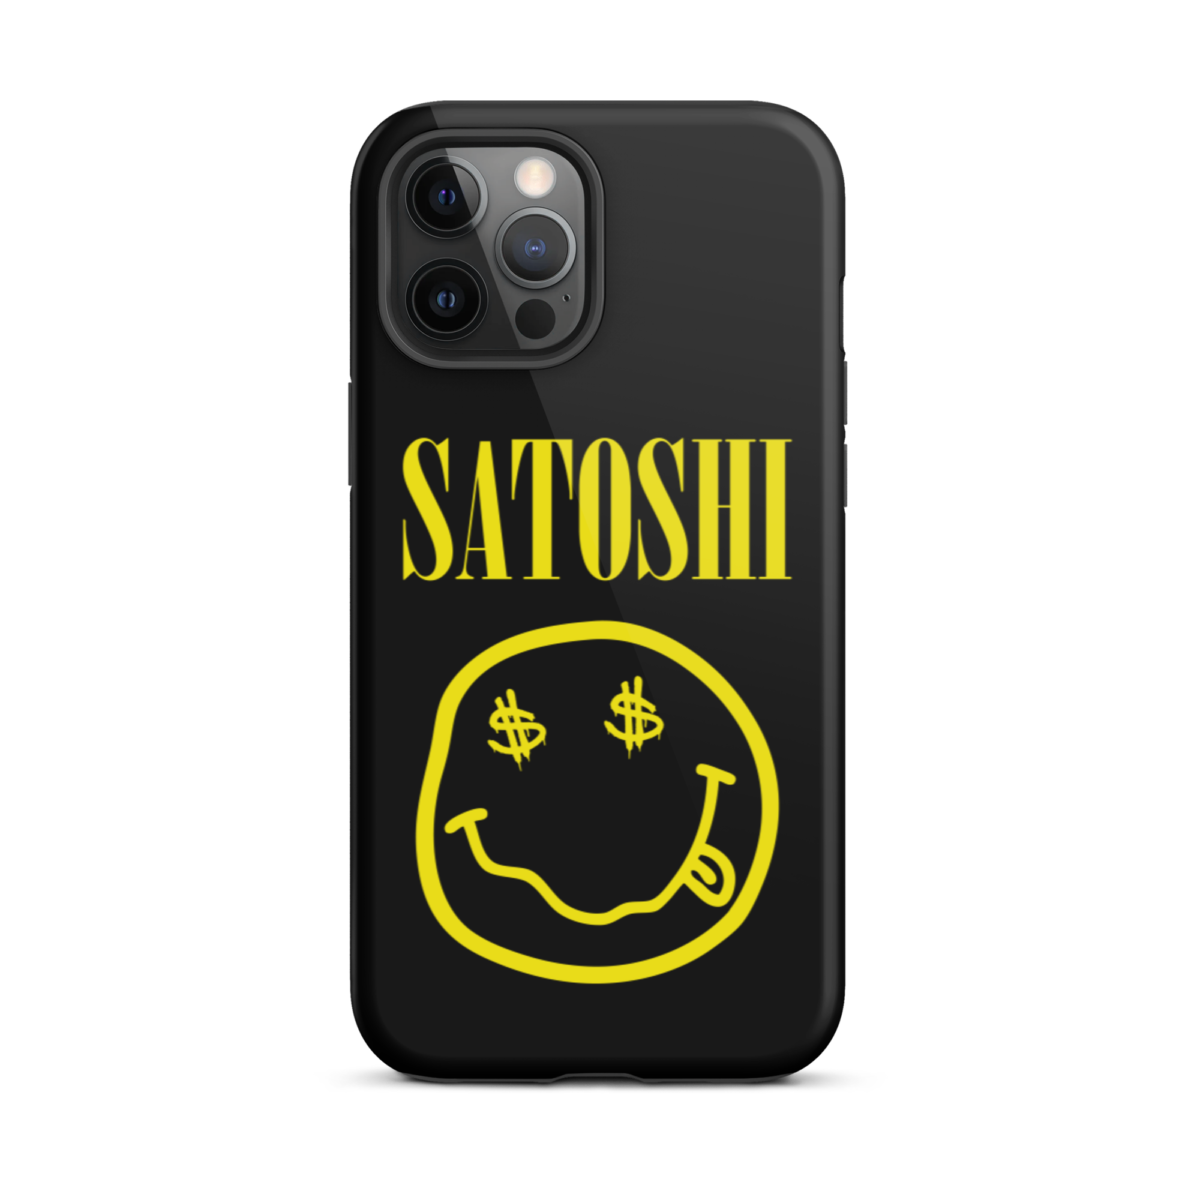 tough iphone case glossy iphone 12 pro max front 6397c1799e9d6 - Satoshi YLW Tough iPhone Case